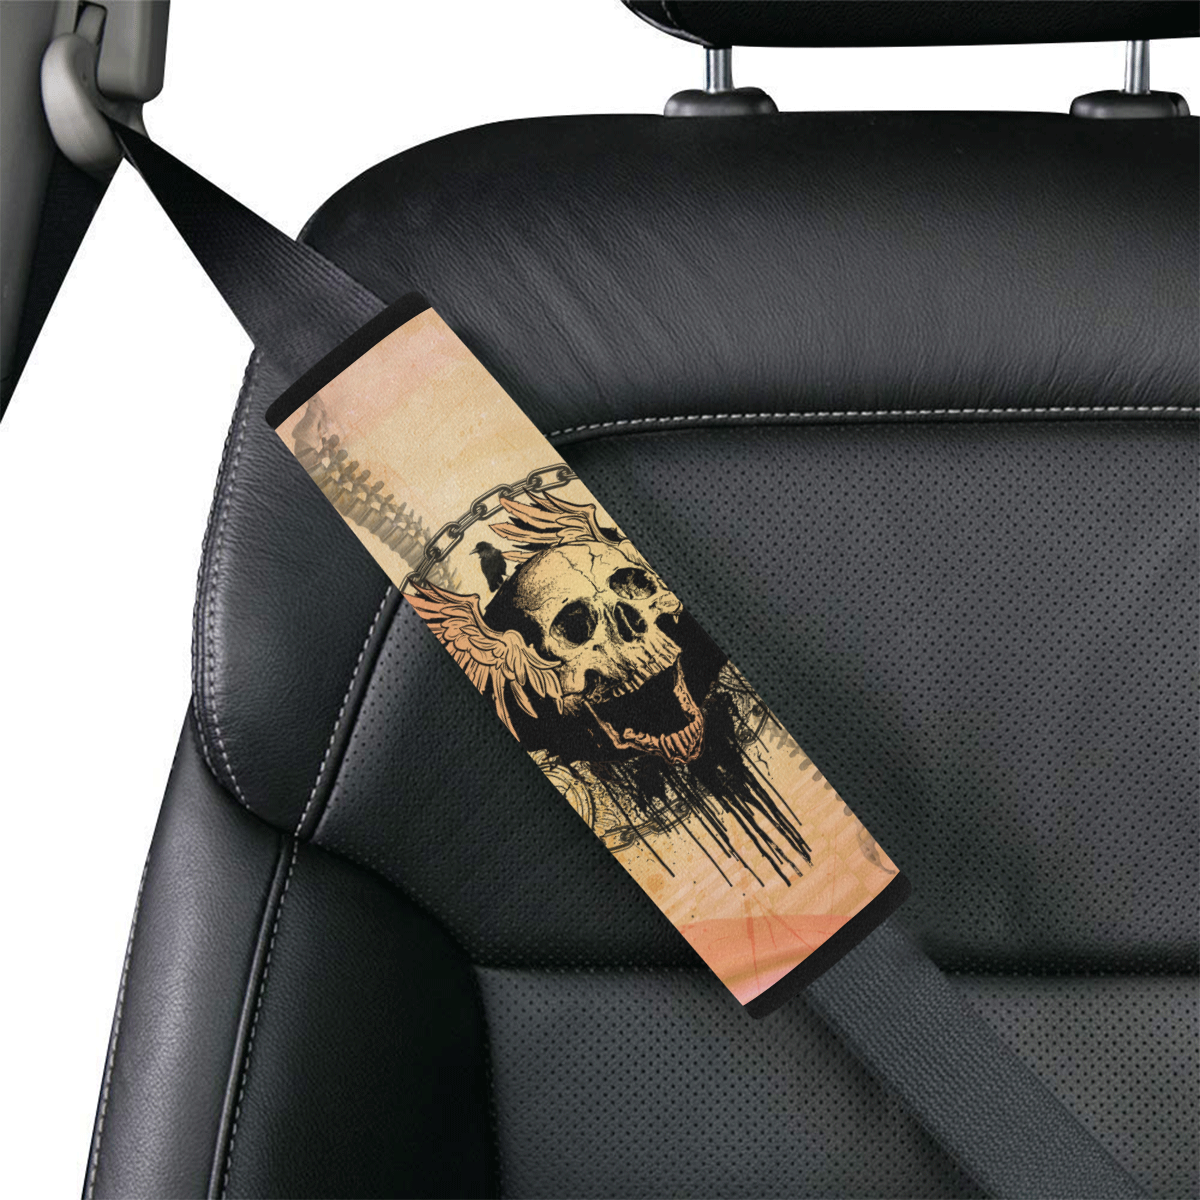 Amazing skull with wings Car Seat Belt Cover 7''x10''